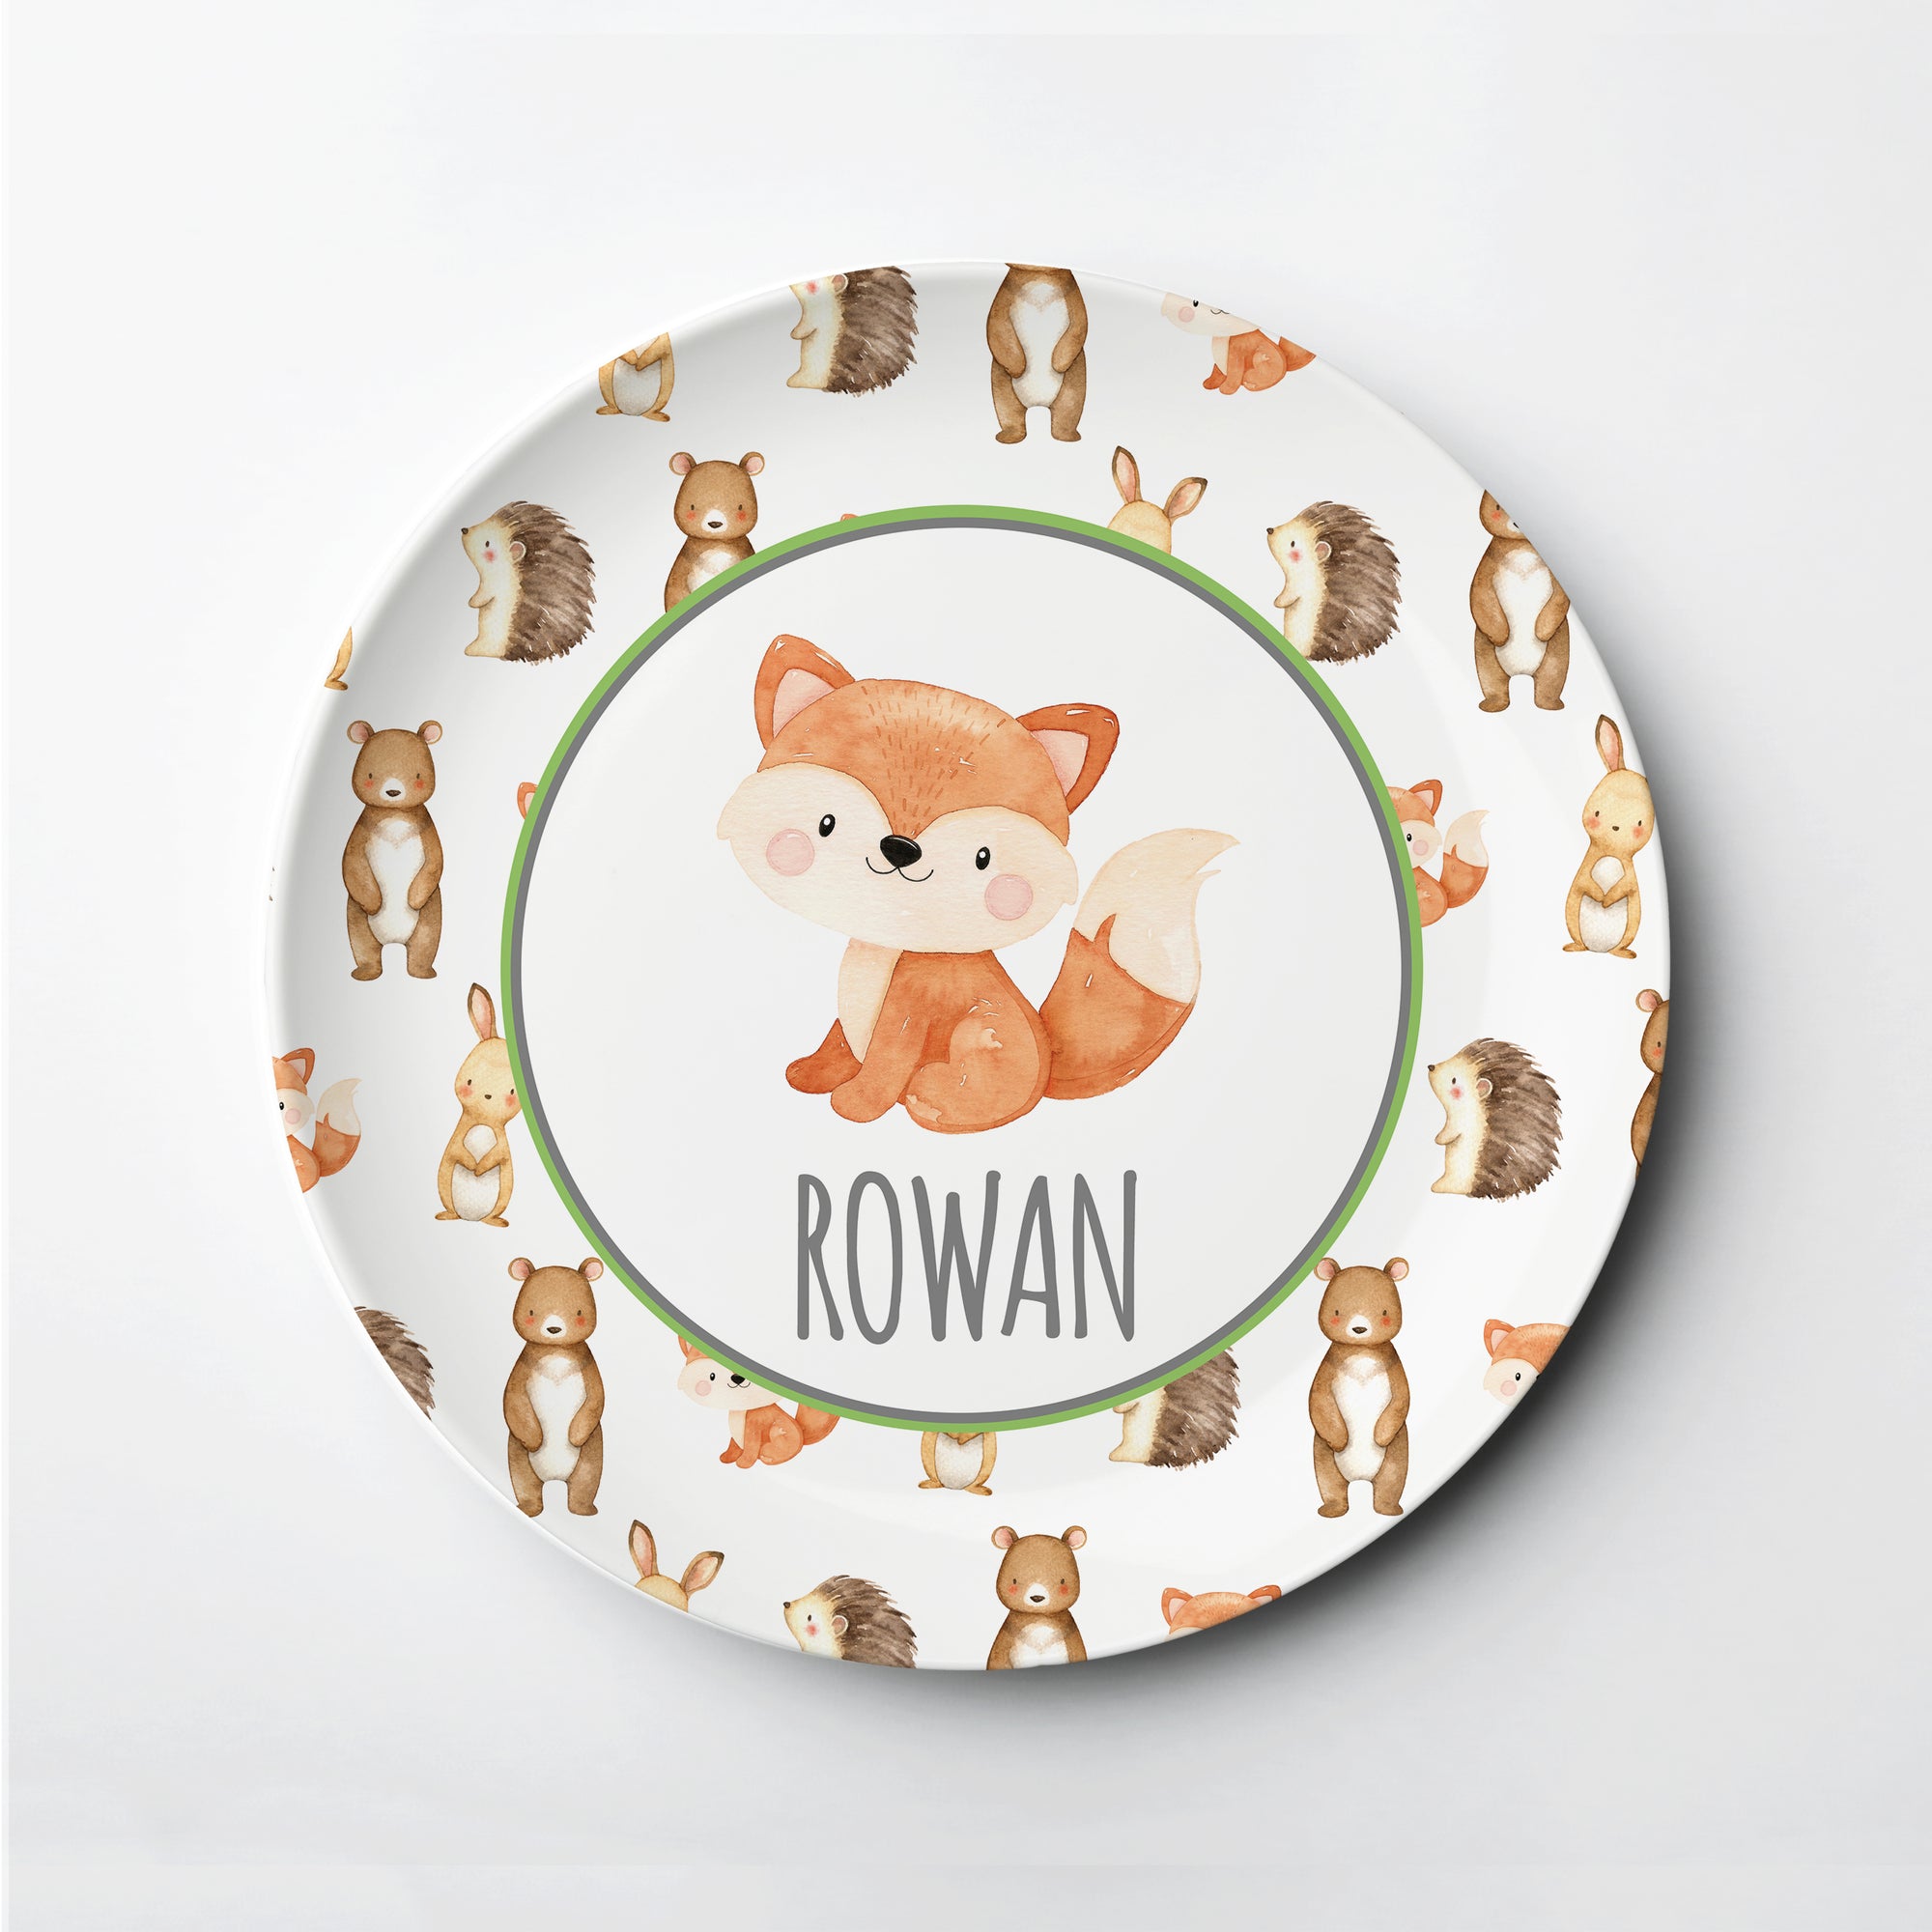 Fox personalized plate - reusable, dishwasher, microwave and oven safe, lasts for yaers